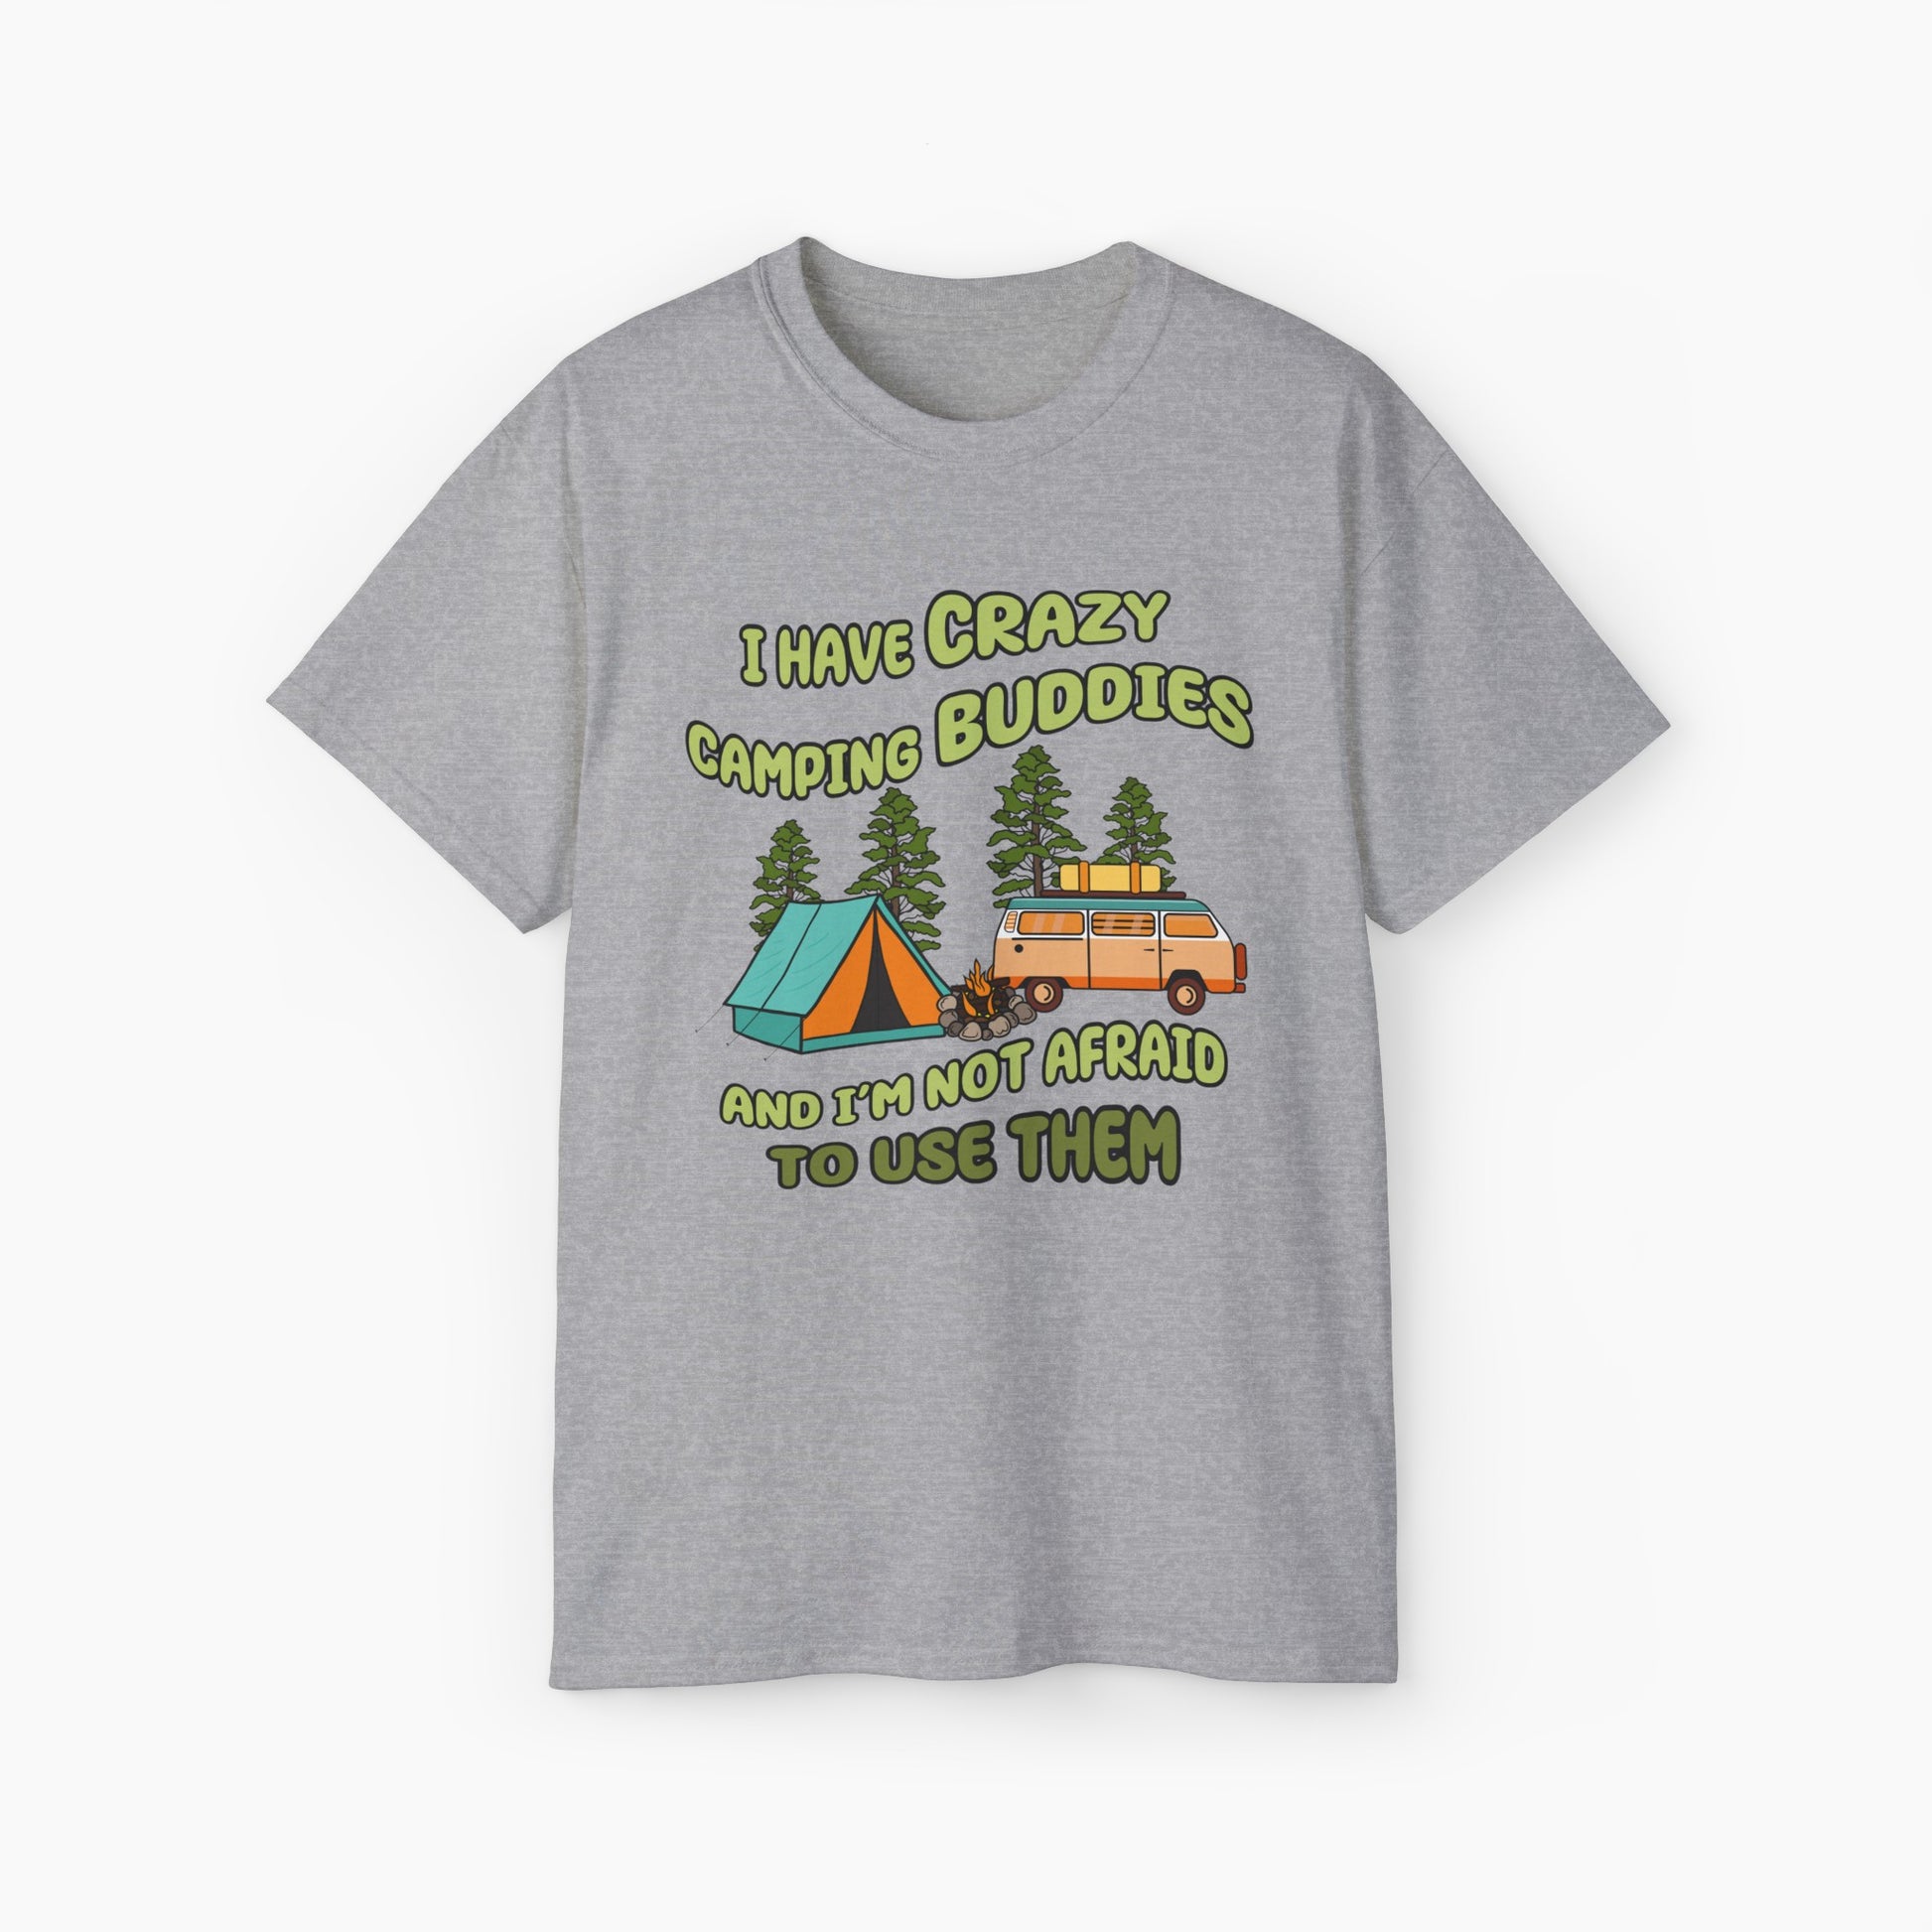 Grey t-shirt with the text 'I have crazy camping buddies and I am not afraid to use them,' featuring a camping van, campfire, trees, and a tent."